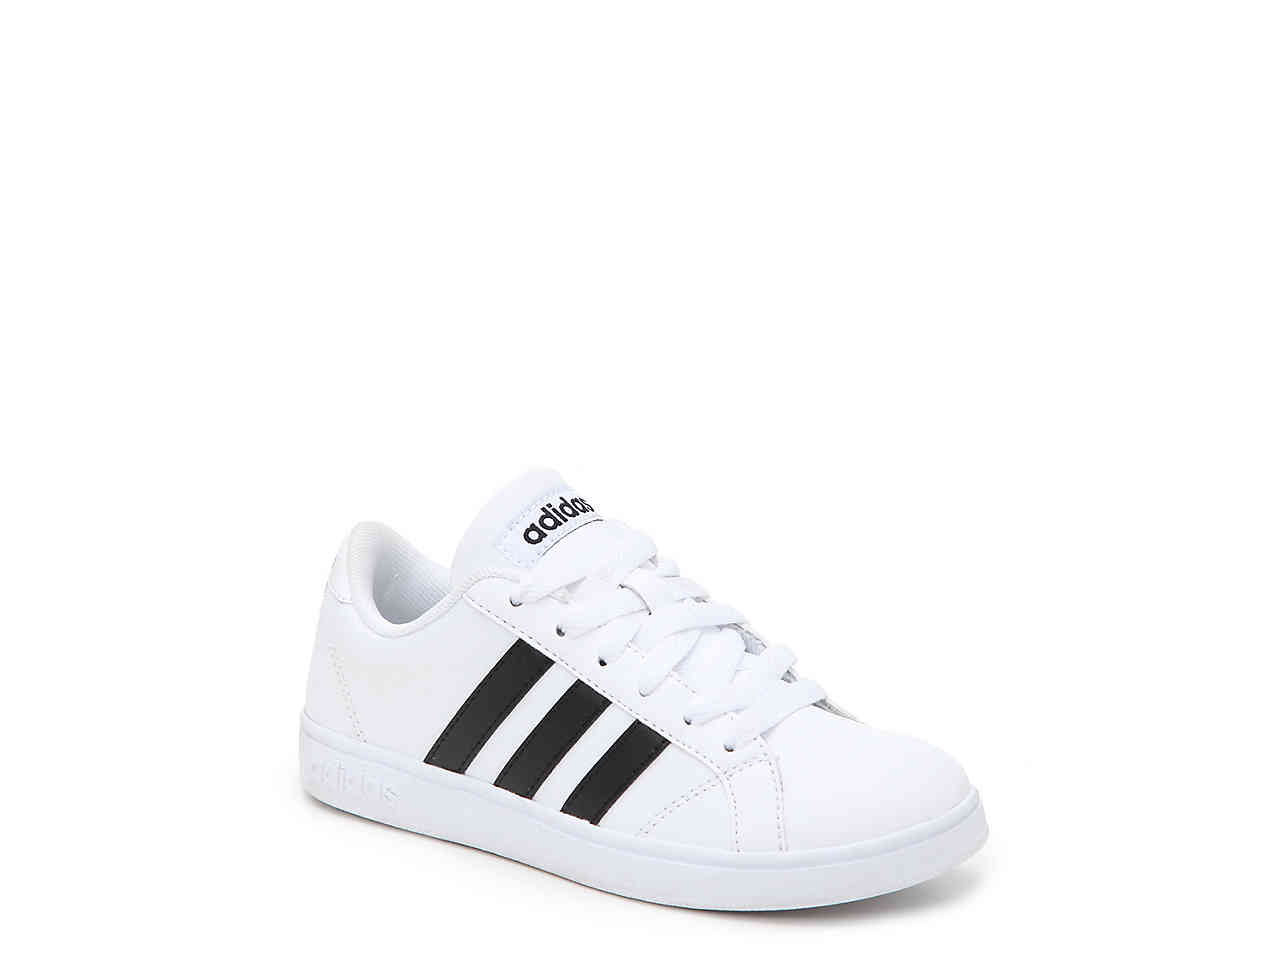 Adidas Shoes for Kids baseline toddler u0026 youth sneaker MEAQEGC